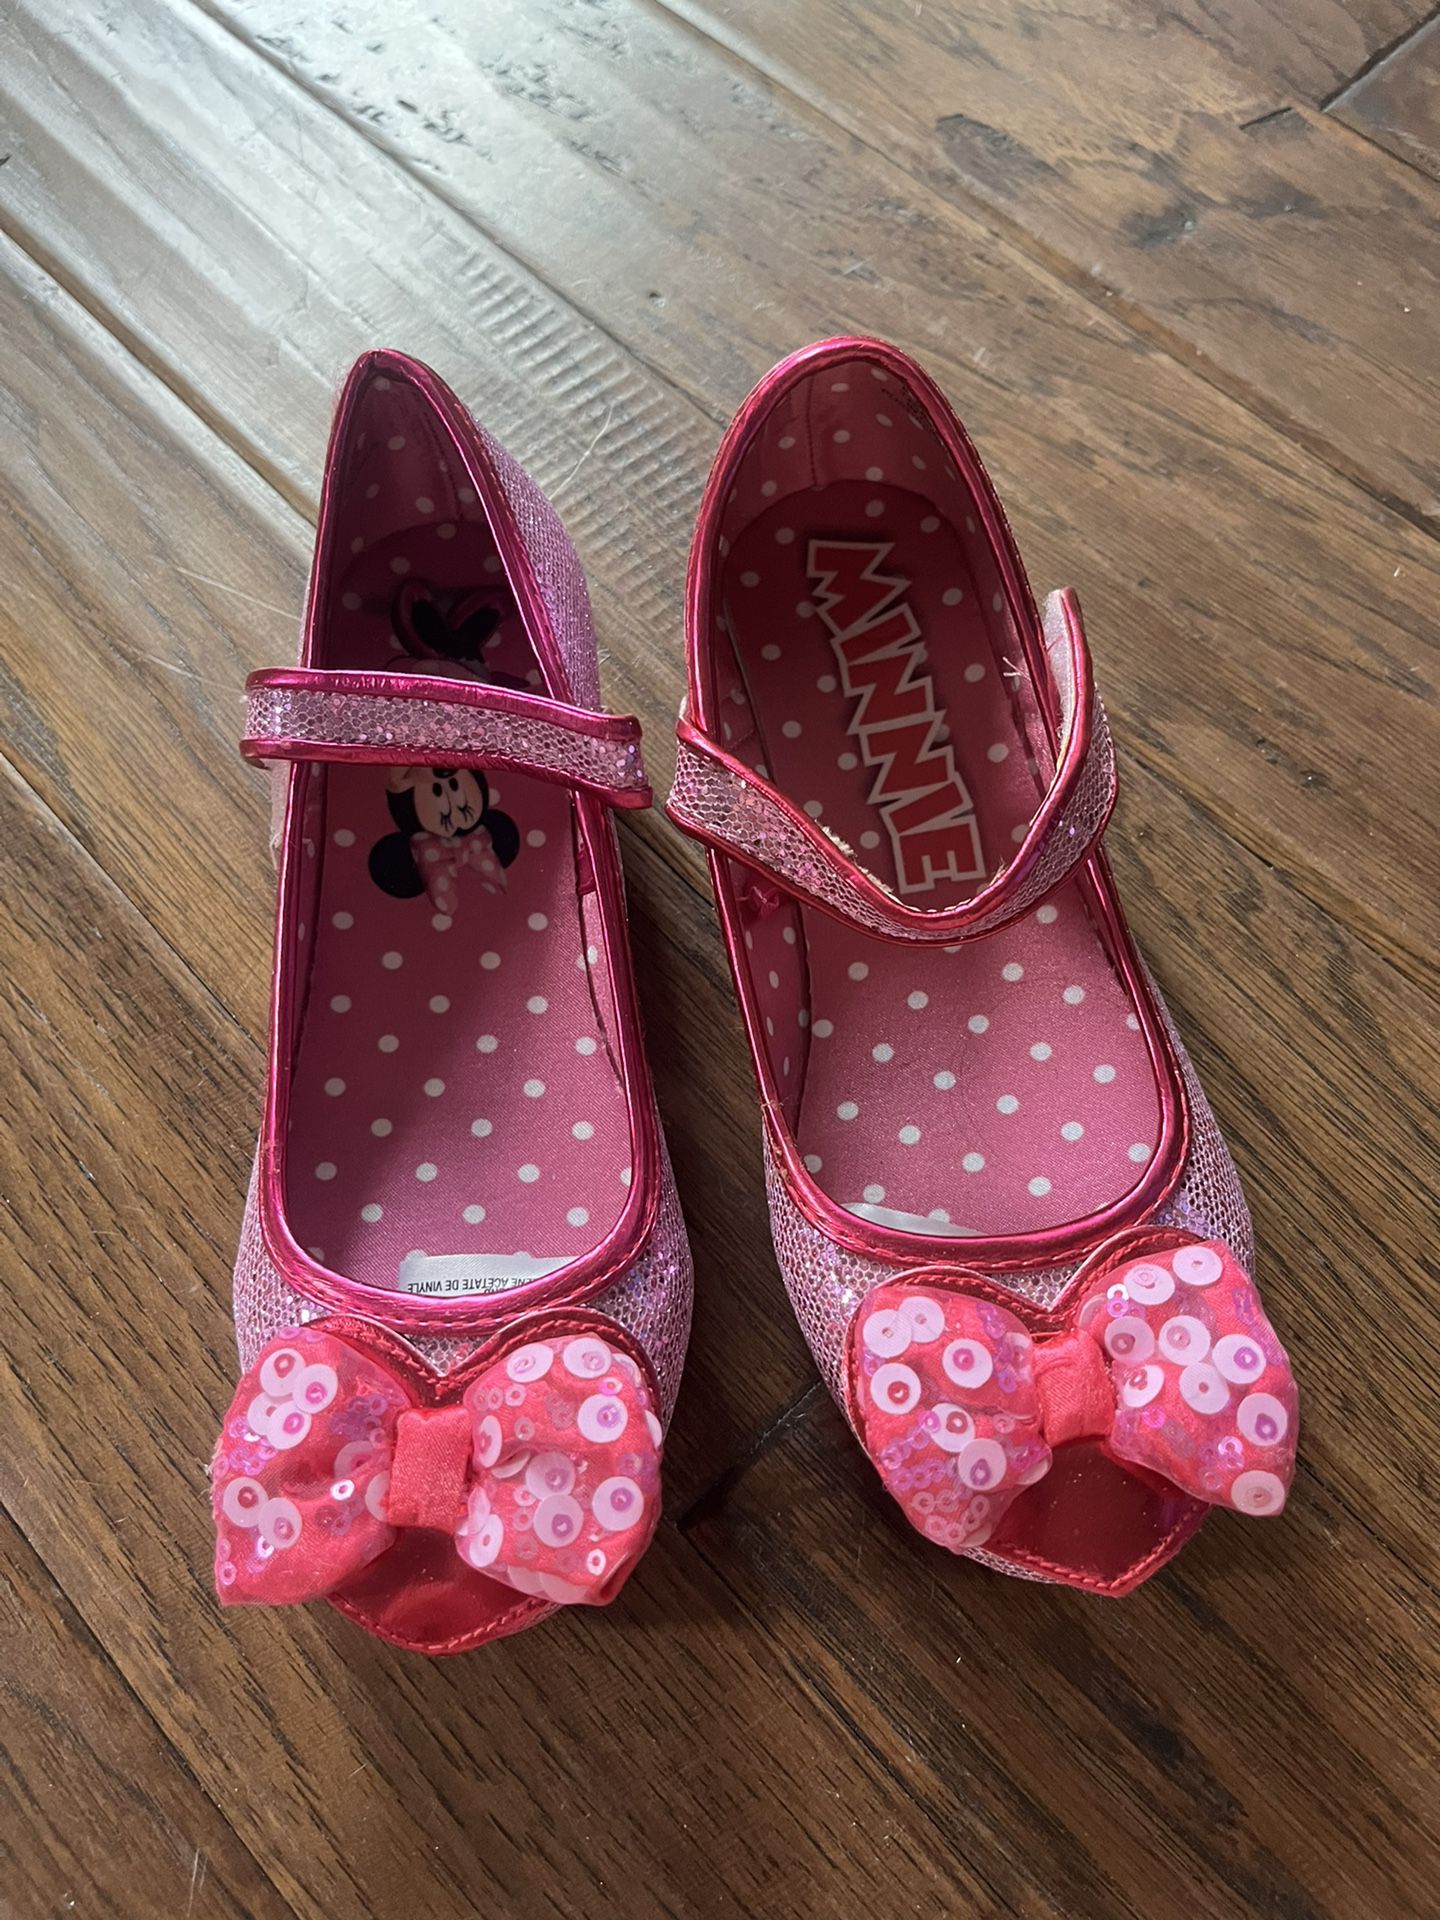 Minnie Mouse Shoes 